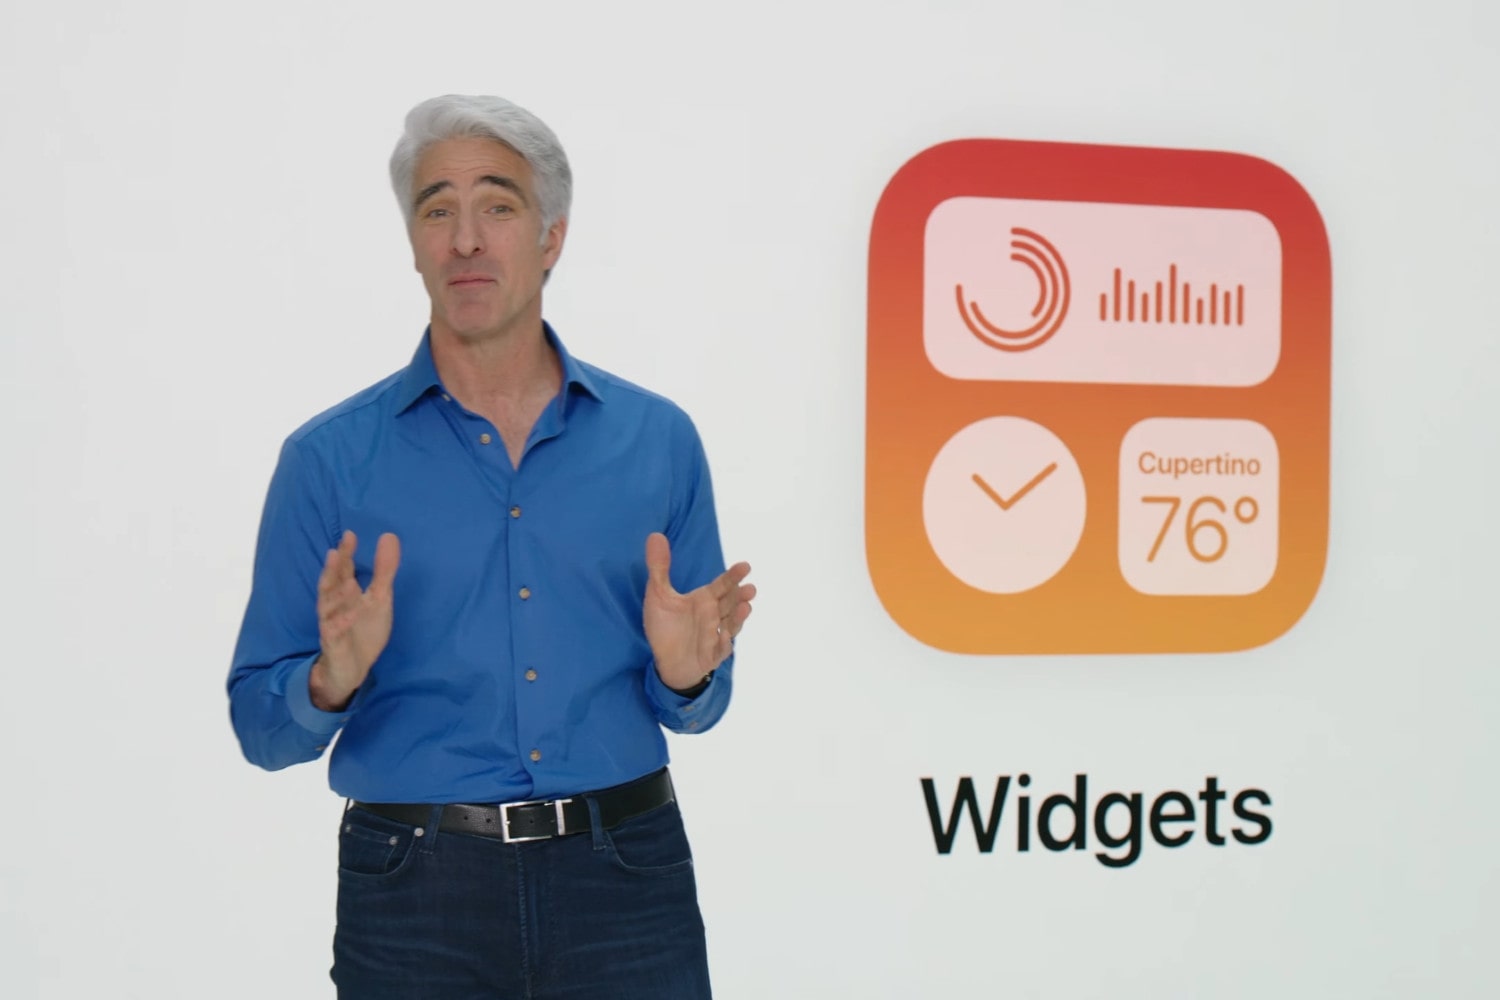 Apple's Craig Federighi introducing widgets in macOS Sonoma at the 2023 Worldwide Developers Conference.